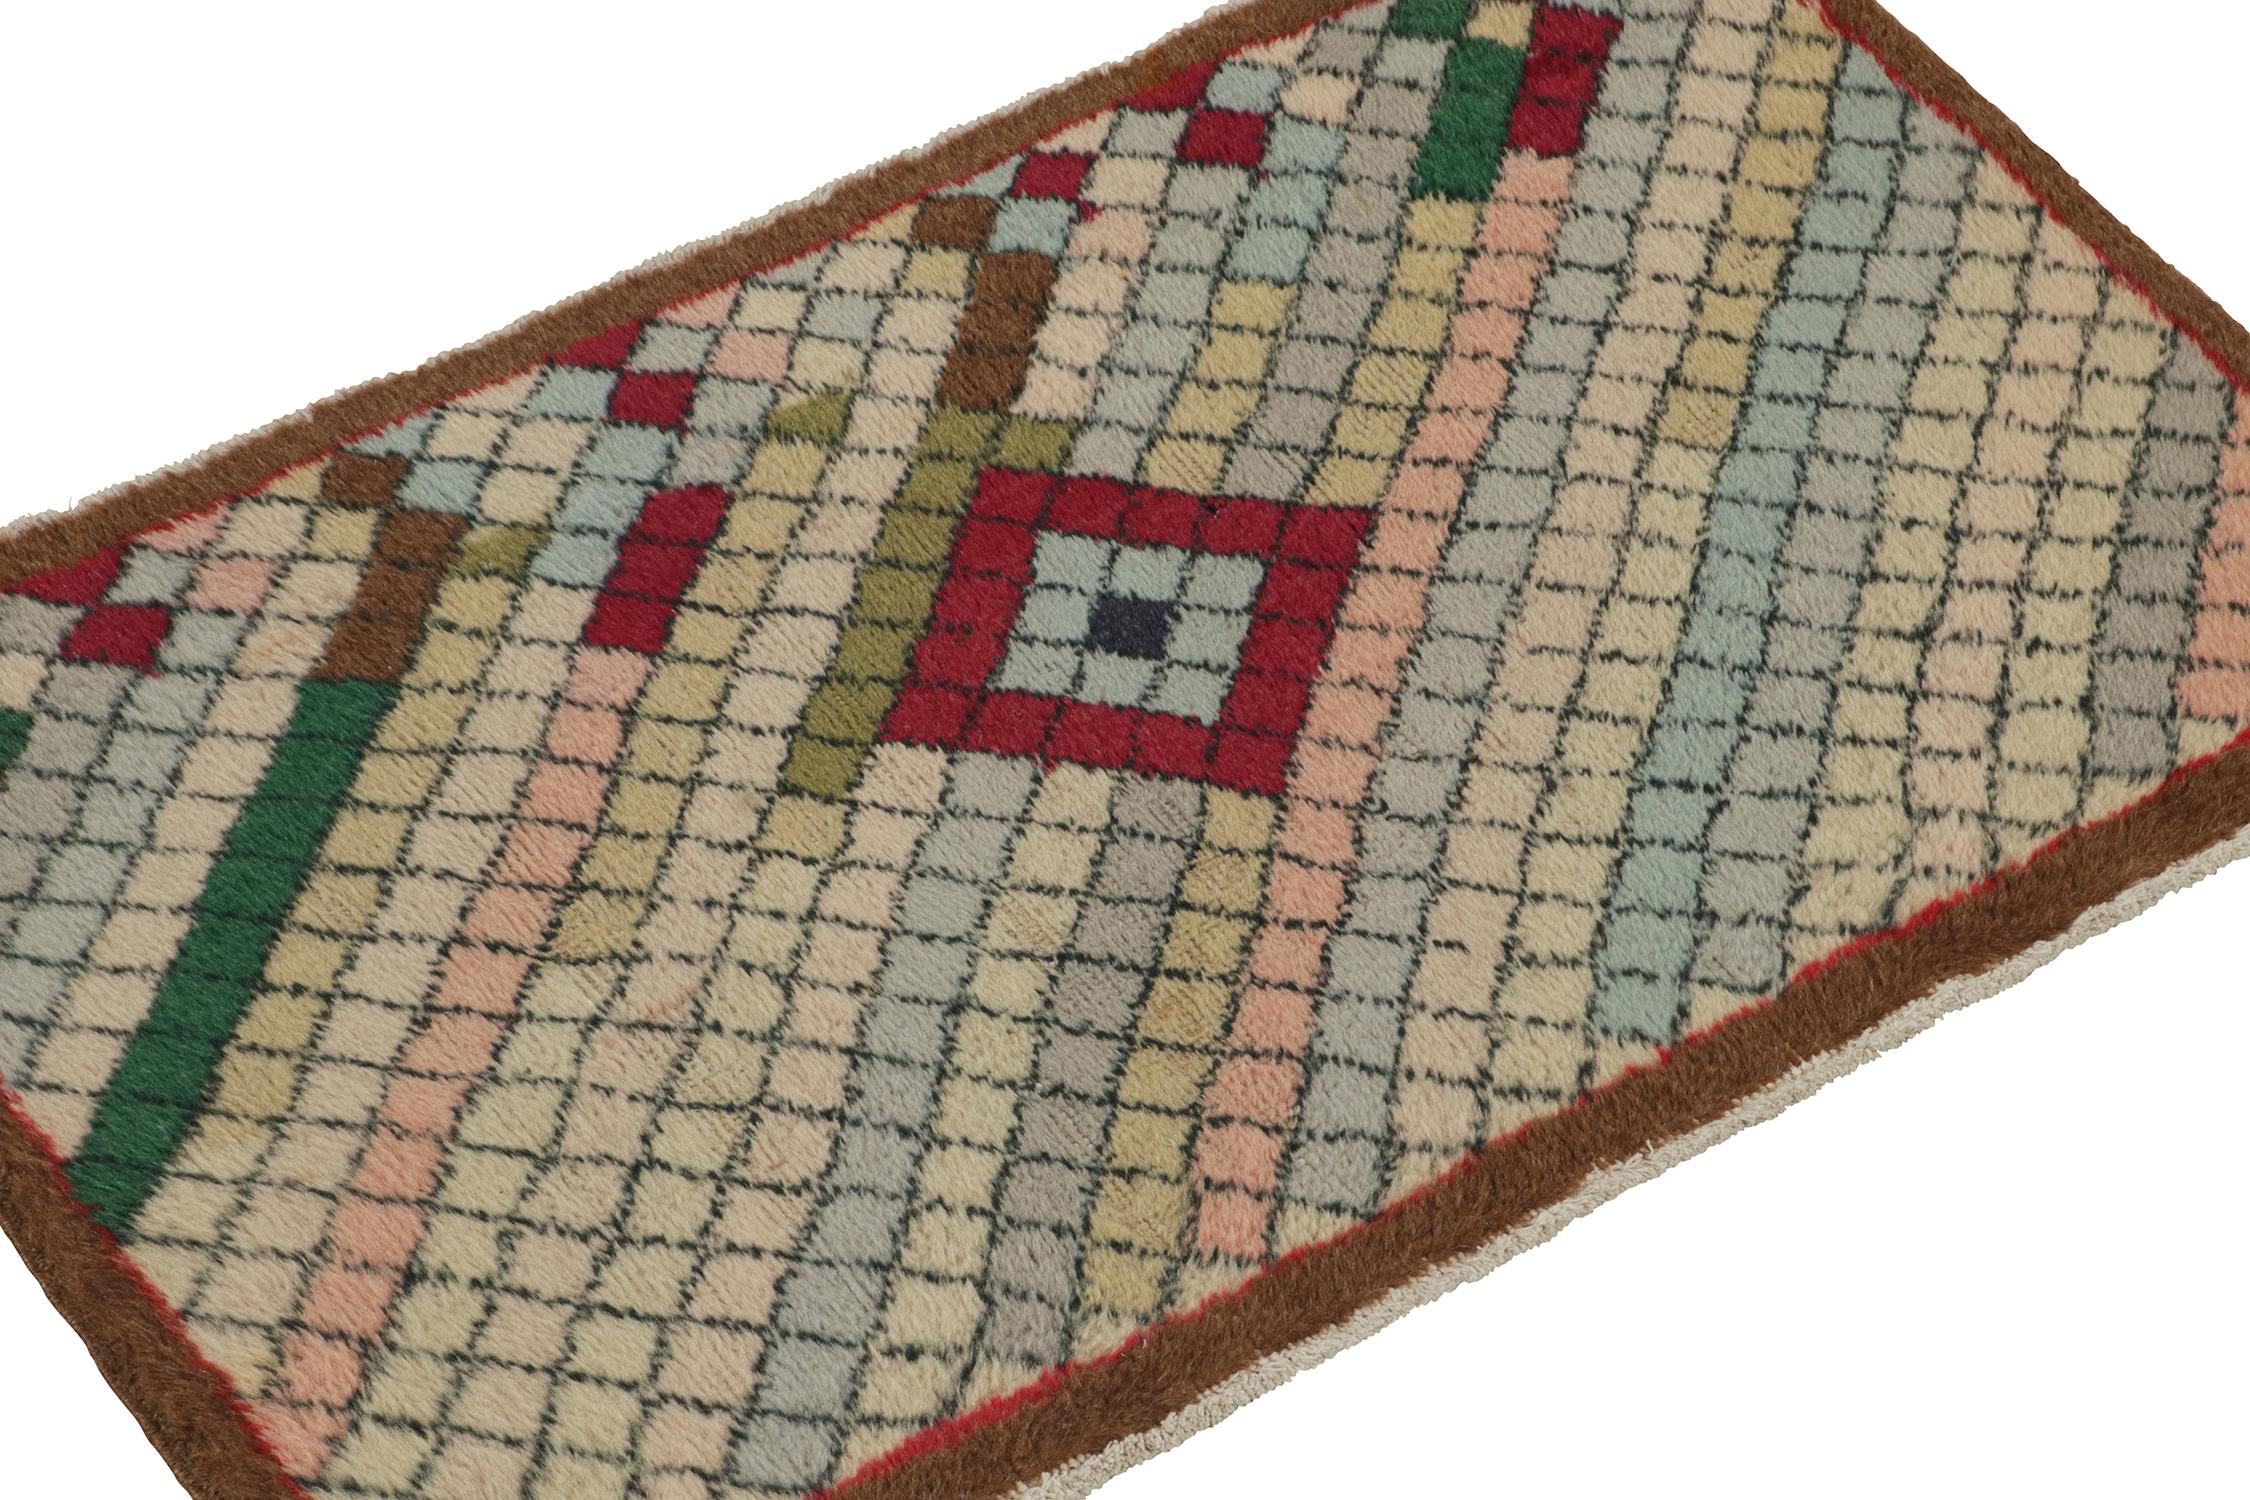 A vintage 2x4 mid-century runner from the Mid-Century Pasha Collection by Rug & Kilim—commemorating the works of acclaimed multi-disciplinary Turkish artist, Zeki Müren. 

On the design: The piece embodies, if not exemplifies, the innovative style